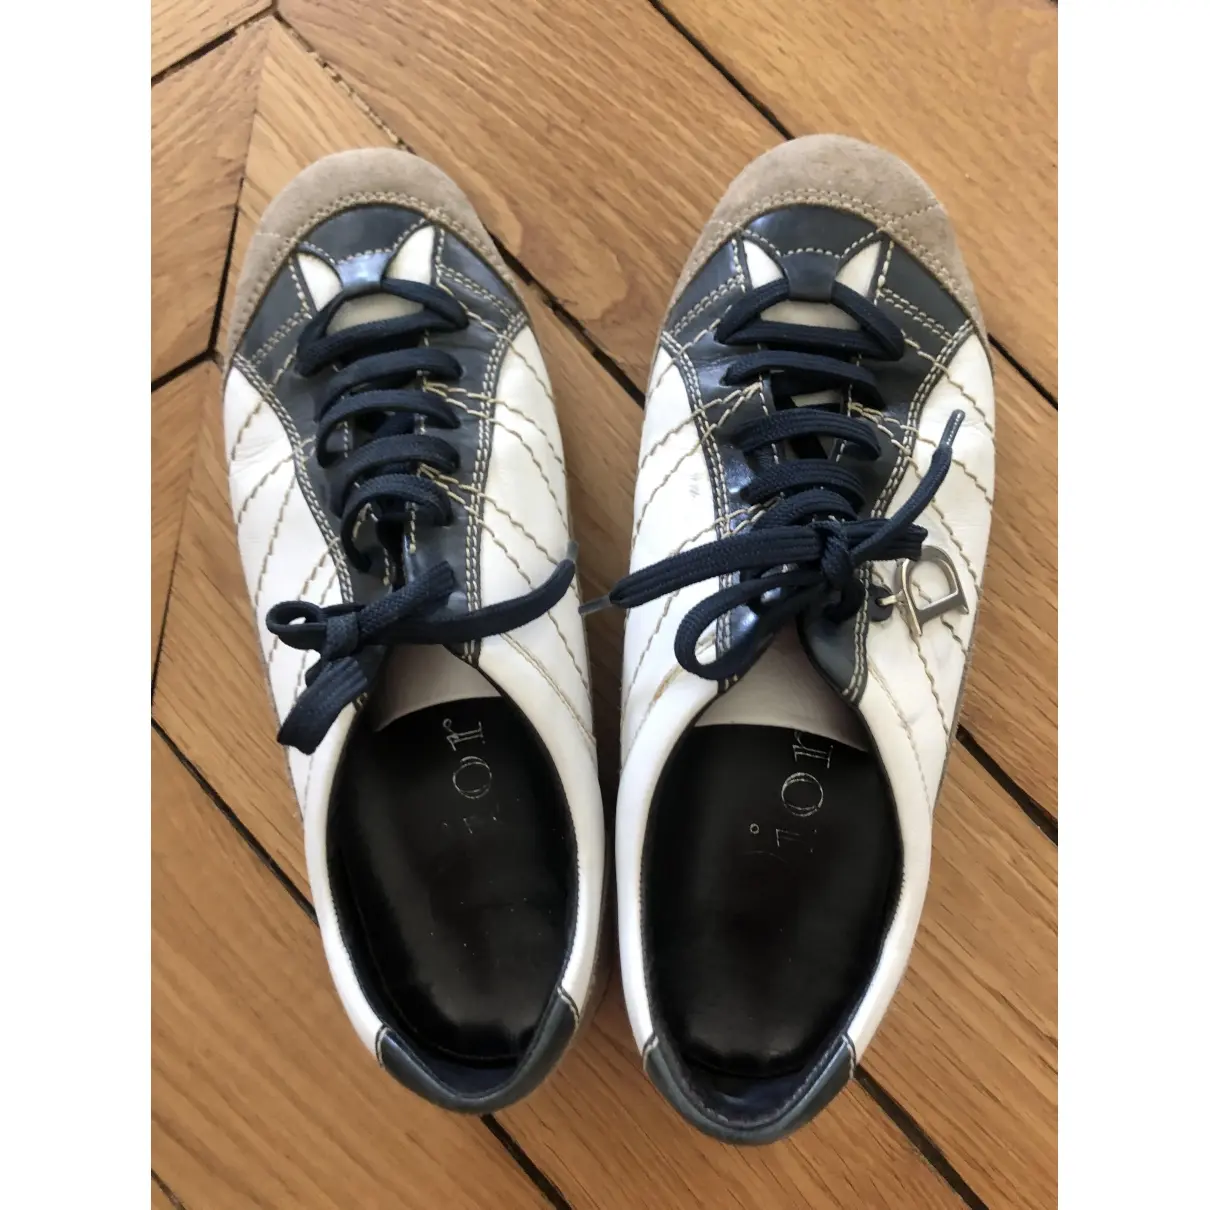 Buy Dior Leather trainers online